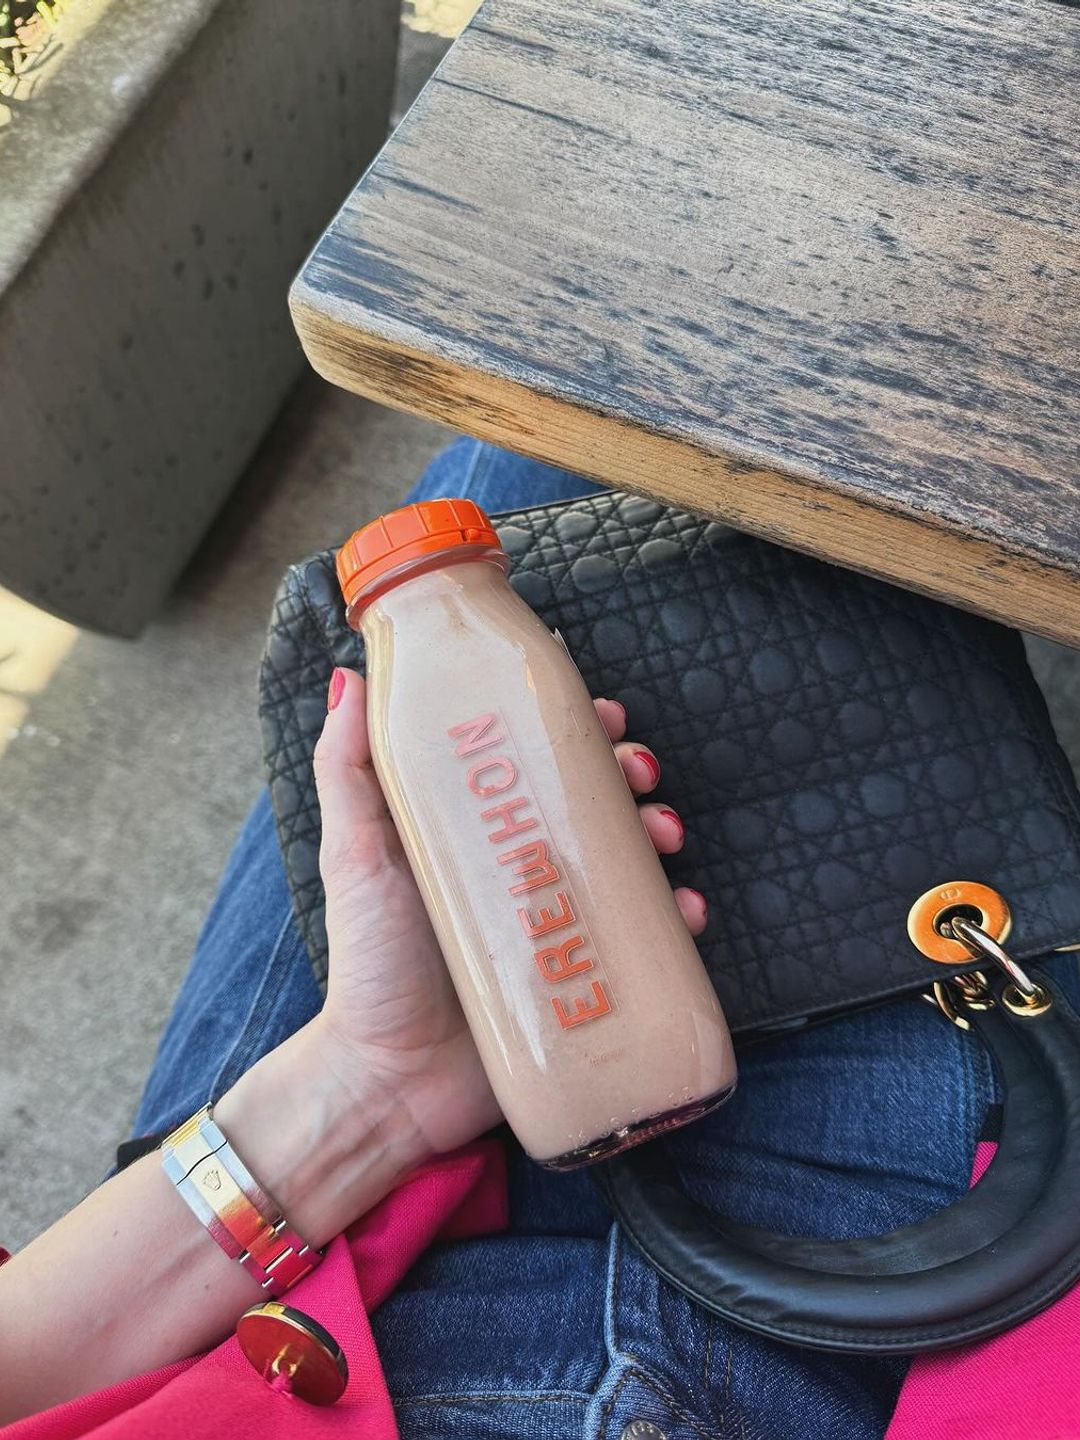 Our editor's Erewhon 'Activated Smoothie' cost a whopping $19.00